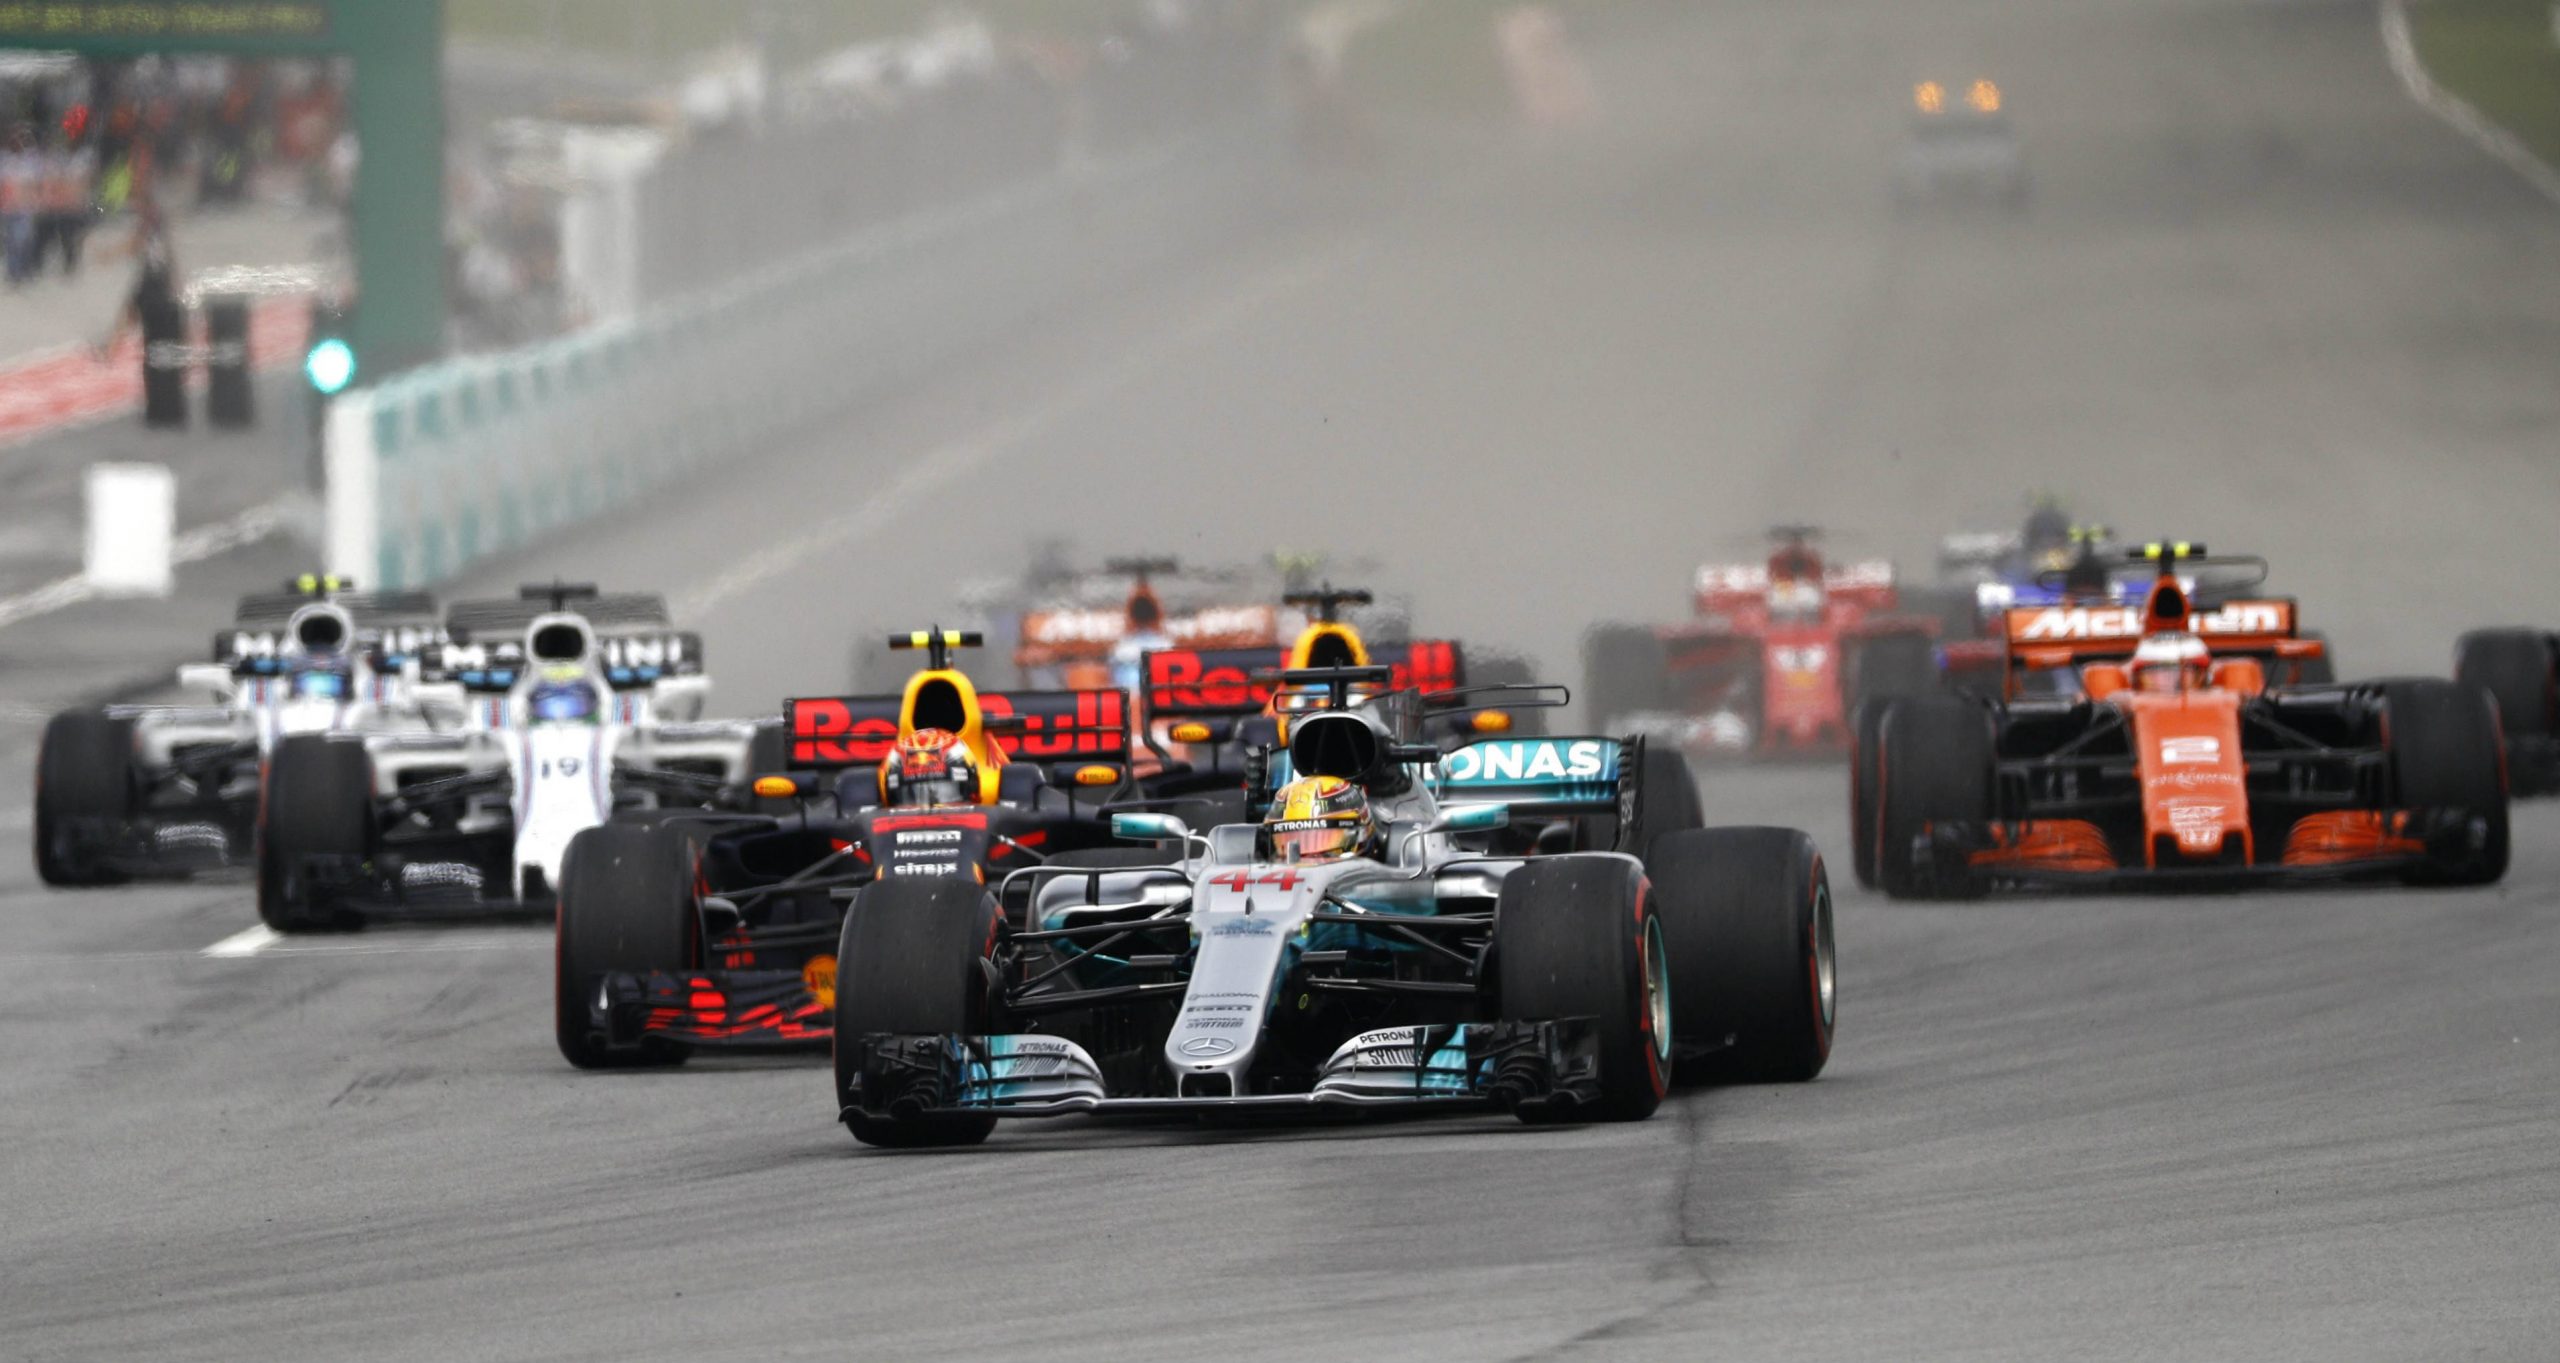 Mercedes-driver-Lewis-Hamilton-of-Britain-leads-the-field-into-turn-one-at-the-start-of-the-Malaysian-Formula-One-Grand-Prix-in-Sepang,-Malaysia,-Sunday,-Oct.-1,-2017.-(Eric-To/AP)